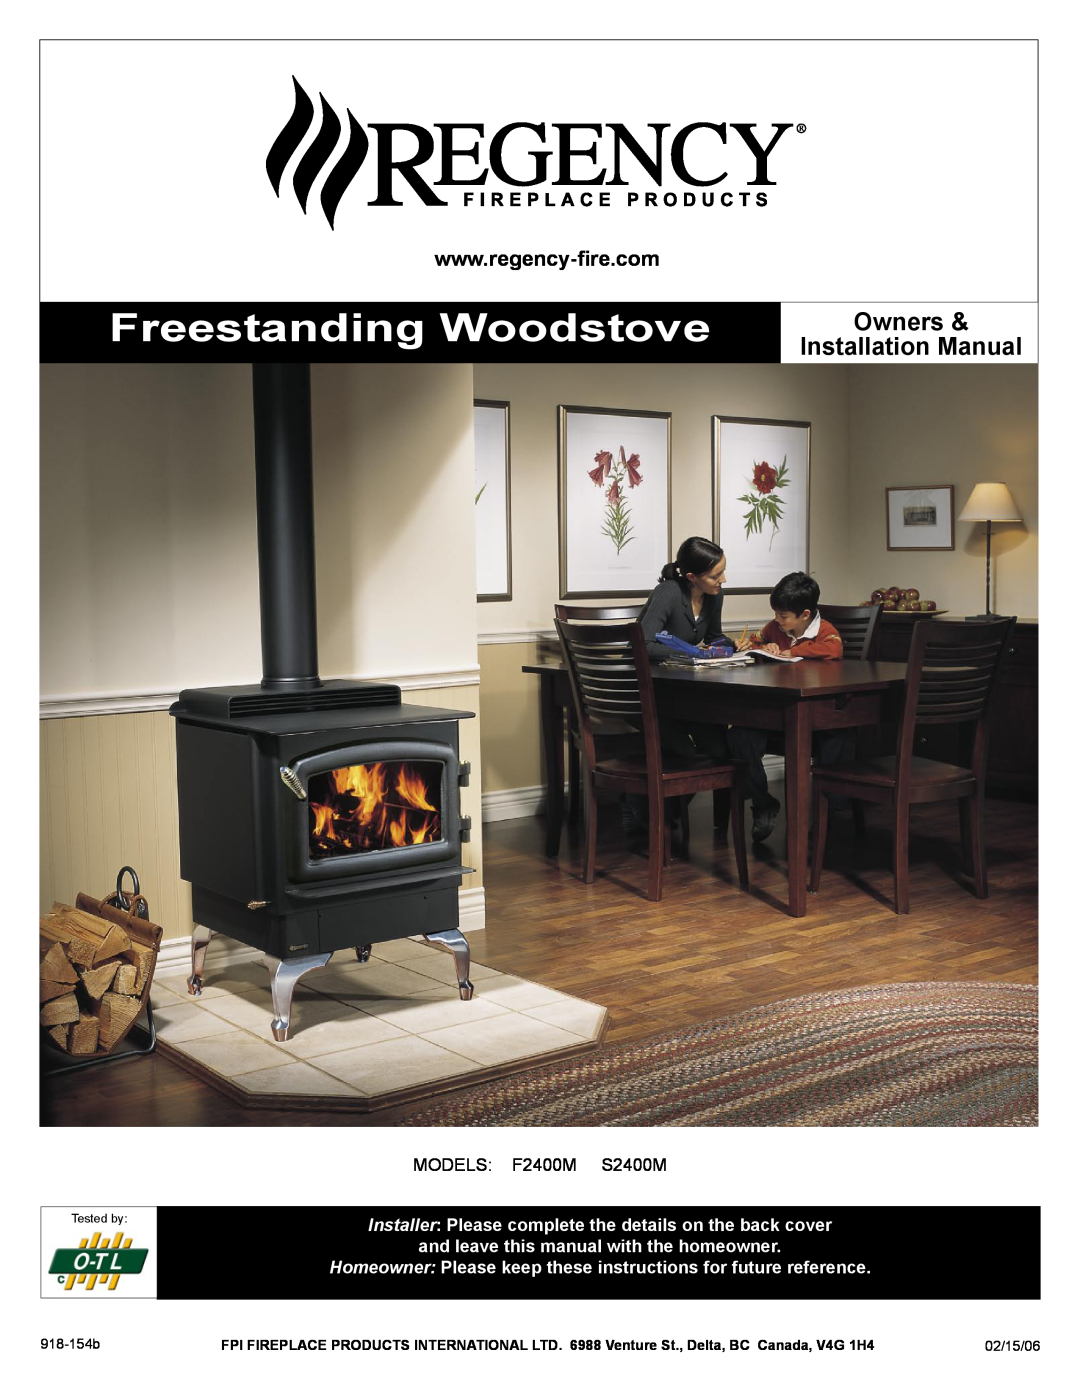 Regency S2400M, F2400M installation manual Freestanding Woodstove, Owners, Installation Manual 